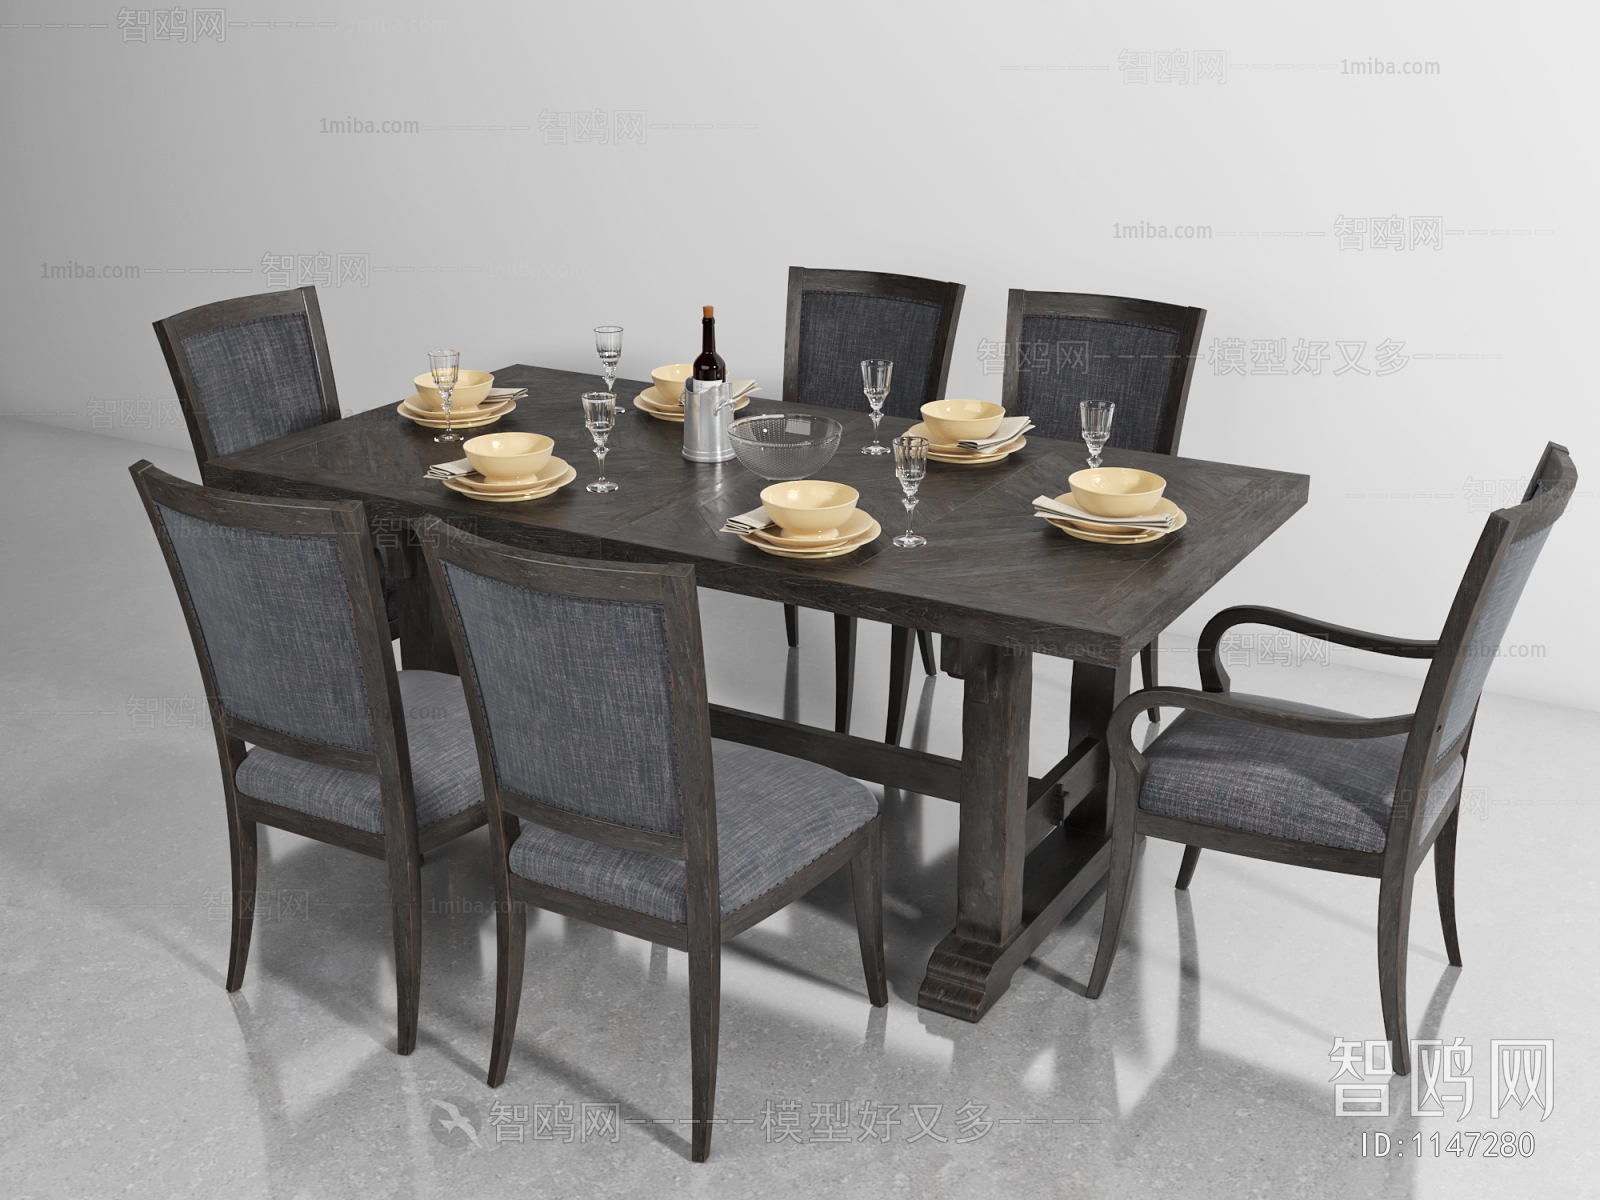 Retro Style Dining Table And Chairs